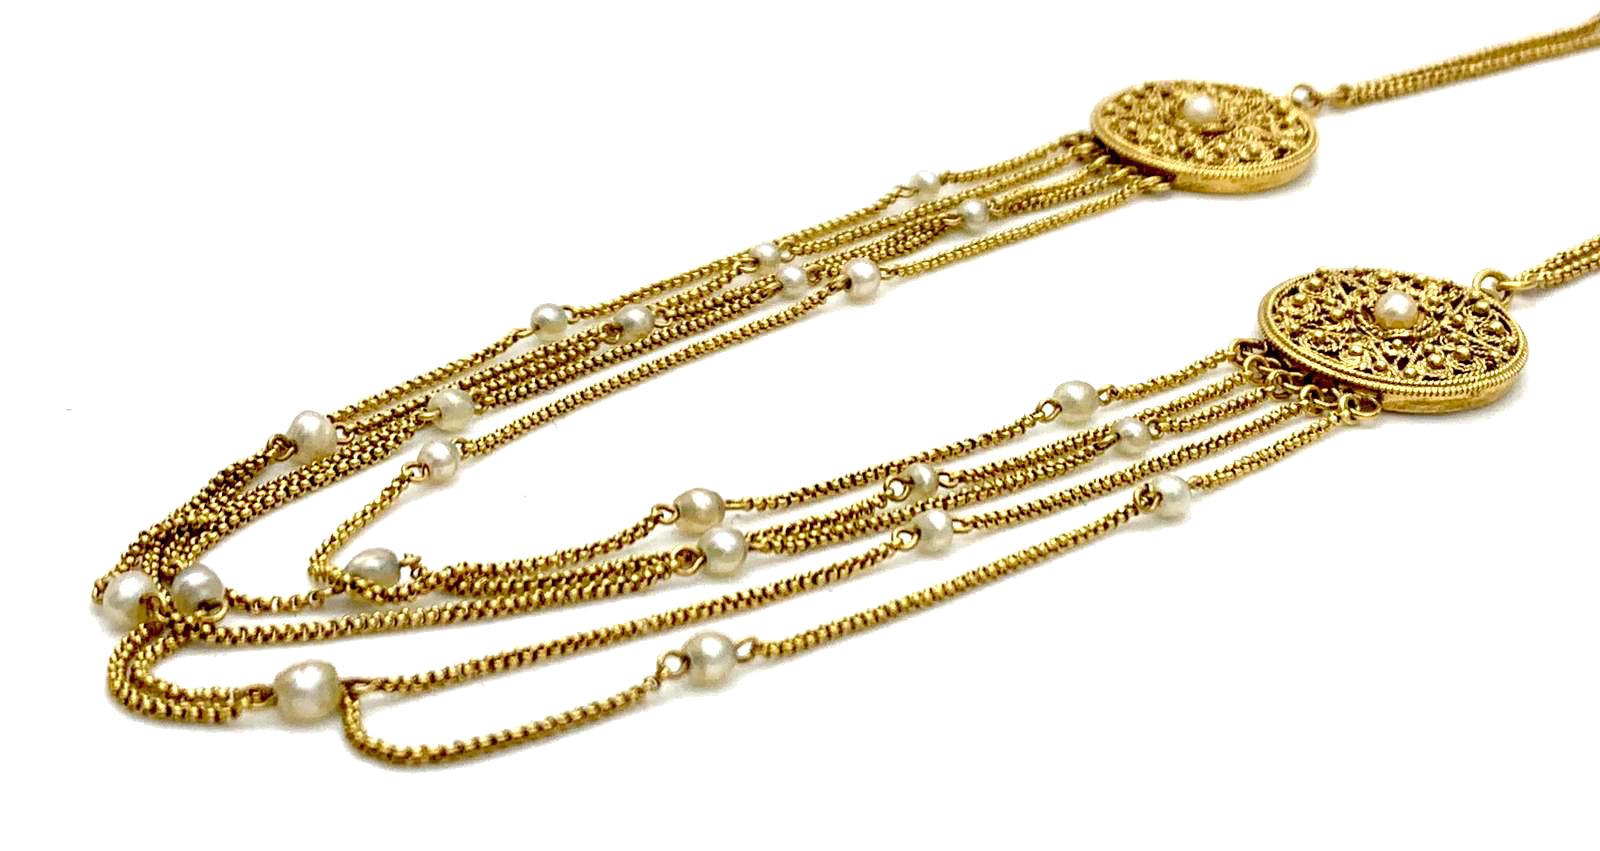 This unusual necklace was created in 1975 ca. It features two round discs suspended from gold chains attached to a grooved barrel clasp. Each disk is decorated with twisted gold wire ornaments, gold balls  and a star with five points. In the centre